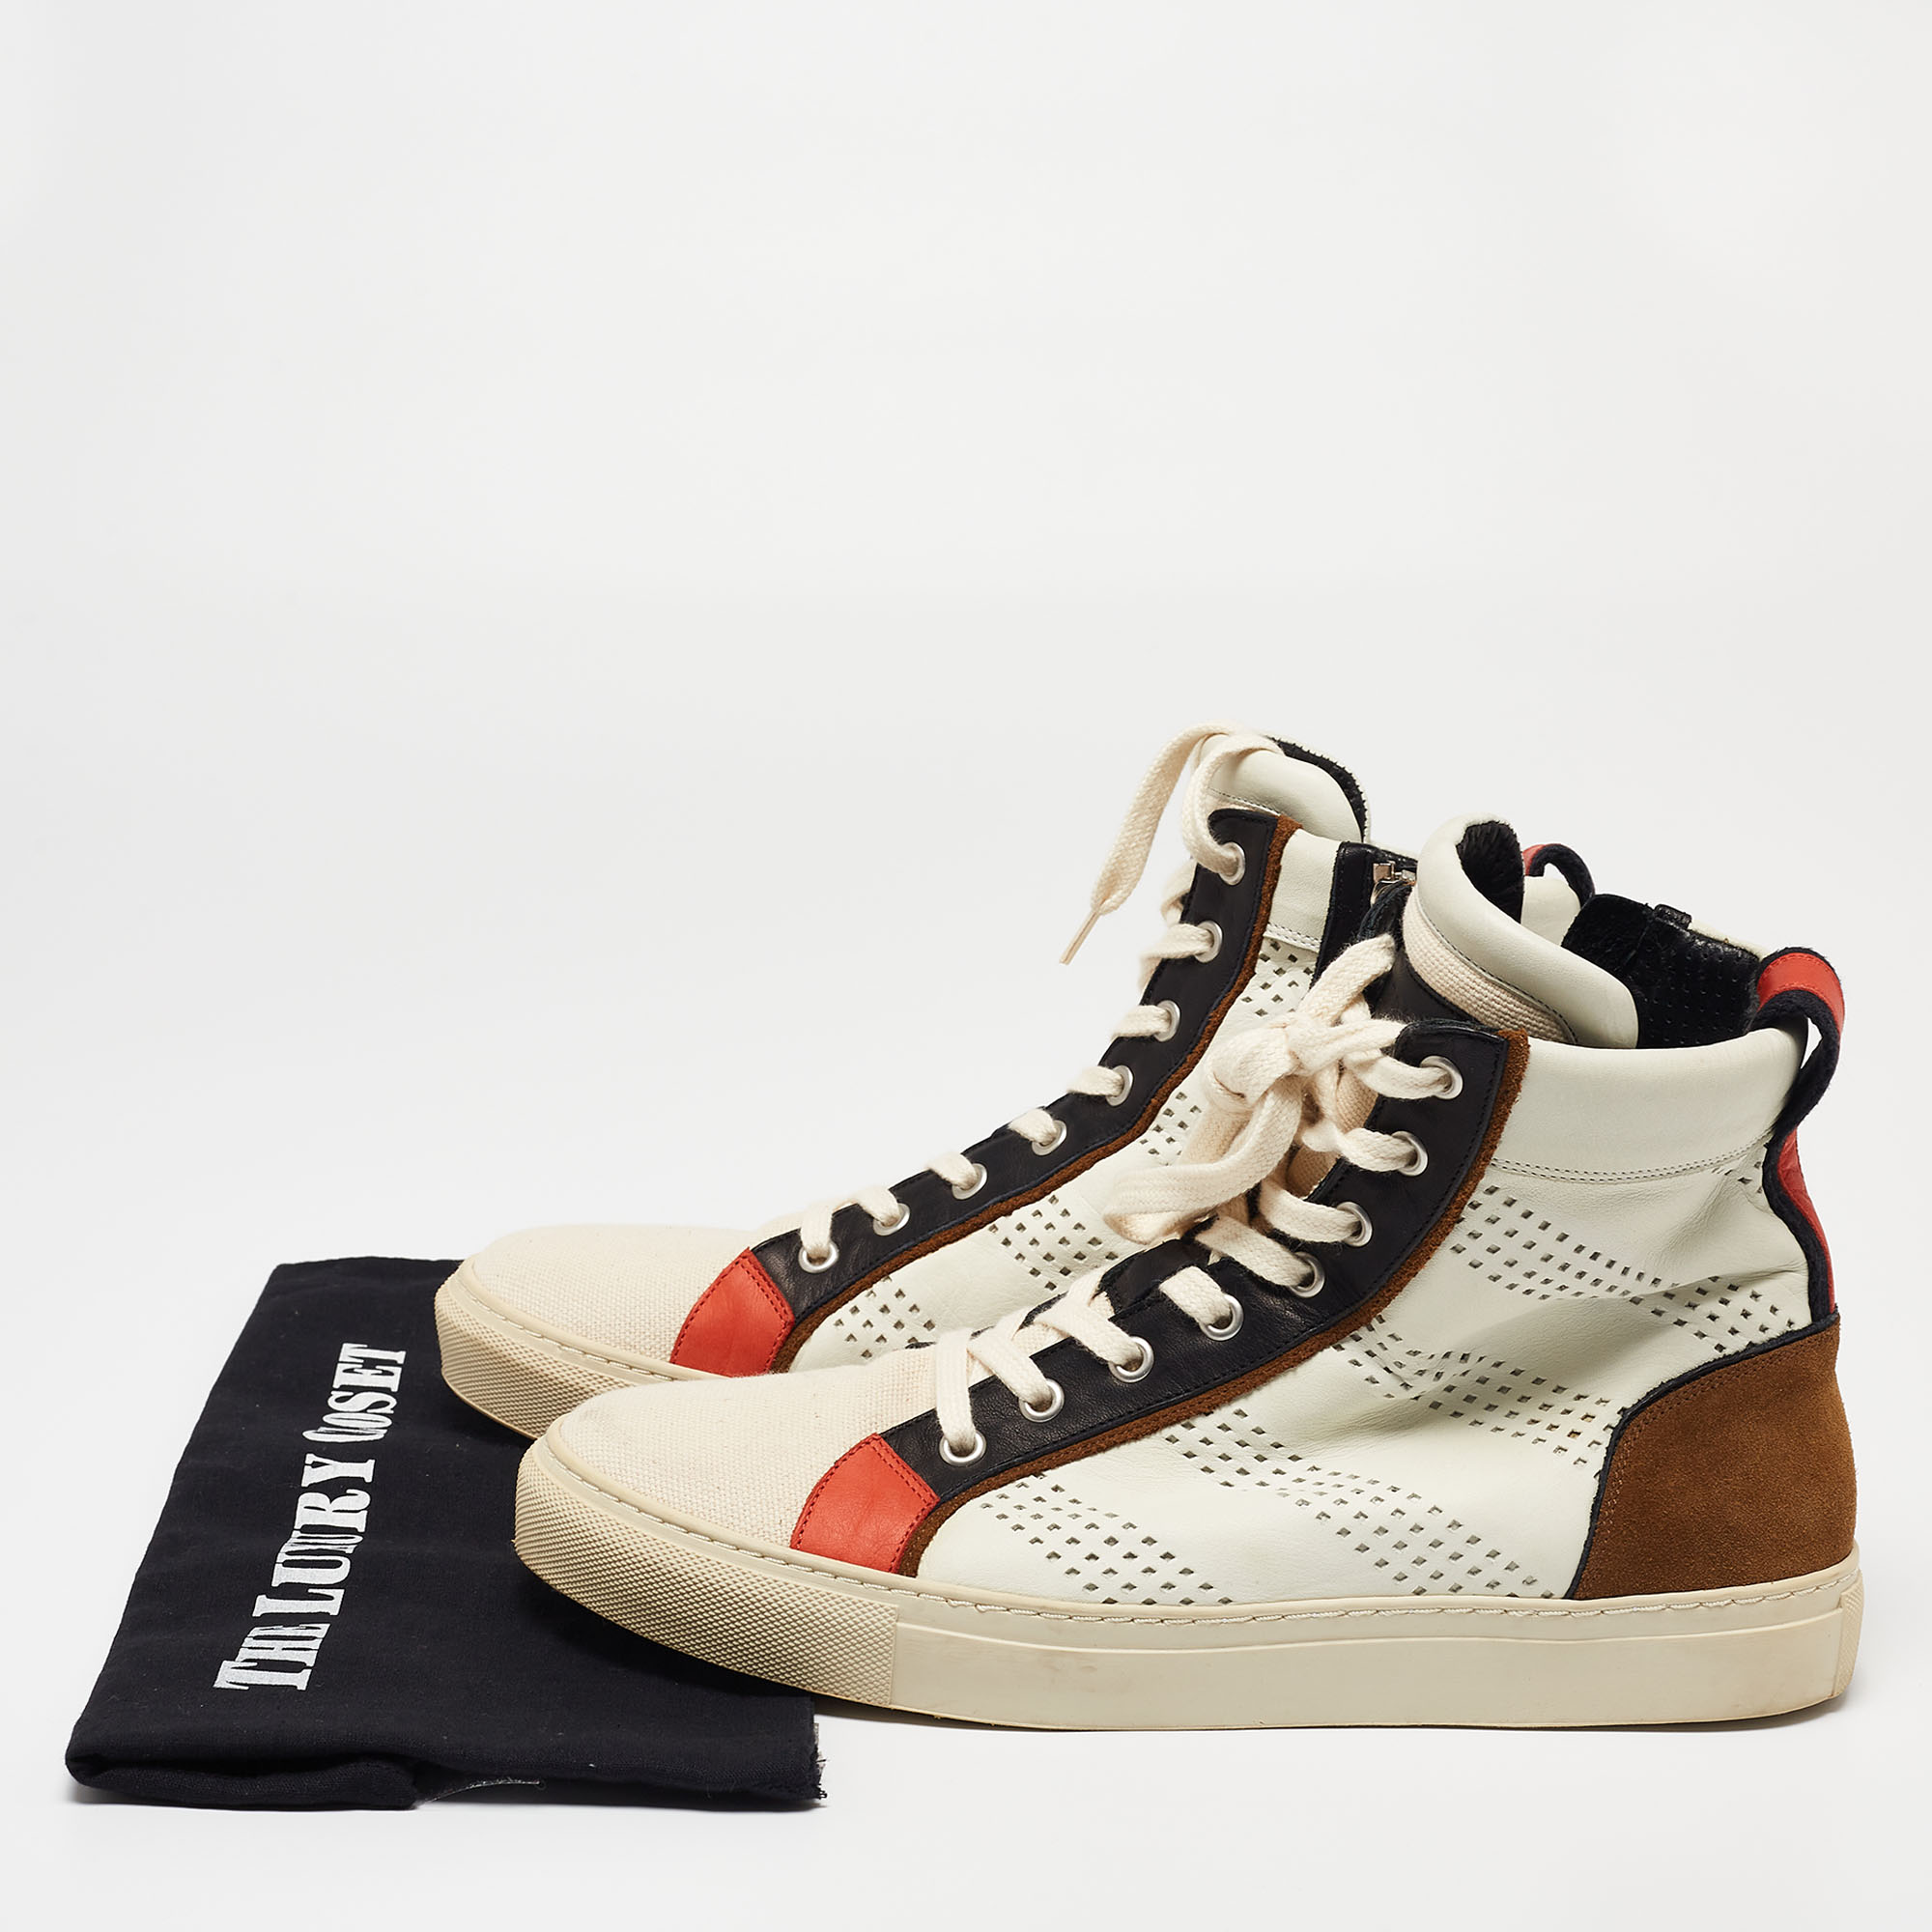 Balmain Multicolor Perforated Leather, Suede And Canvas High-Top Sneakers Size 42